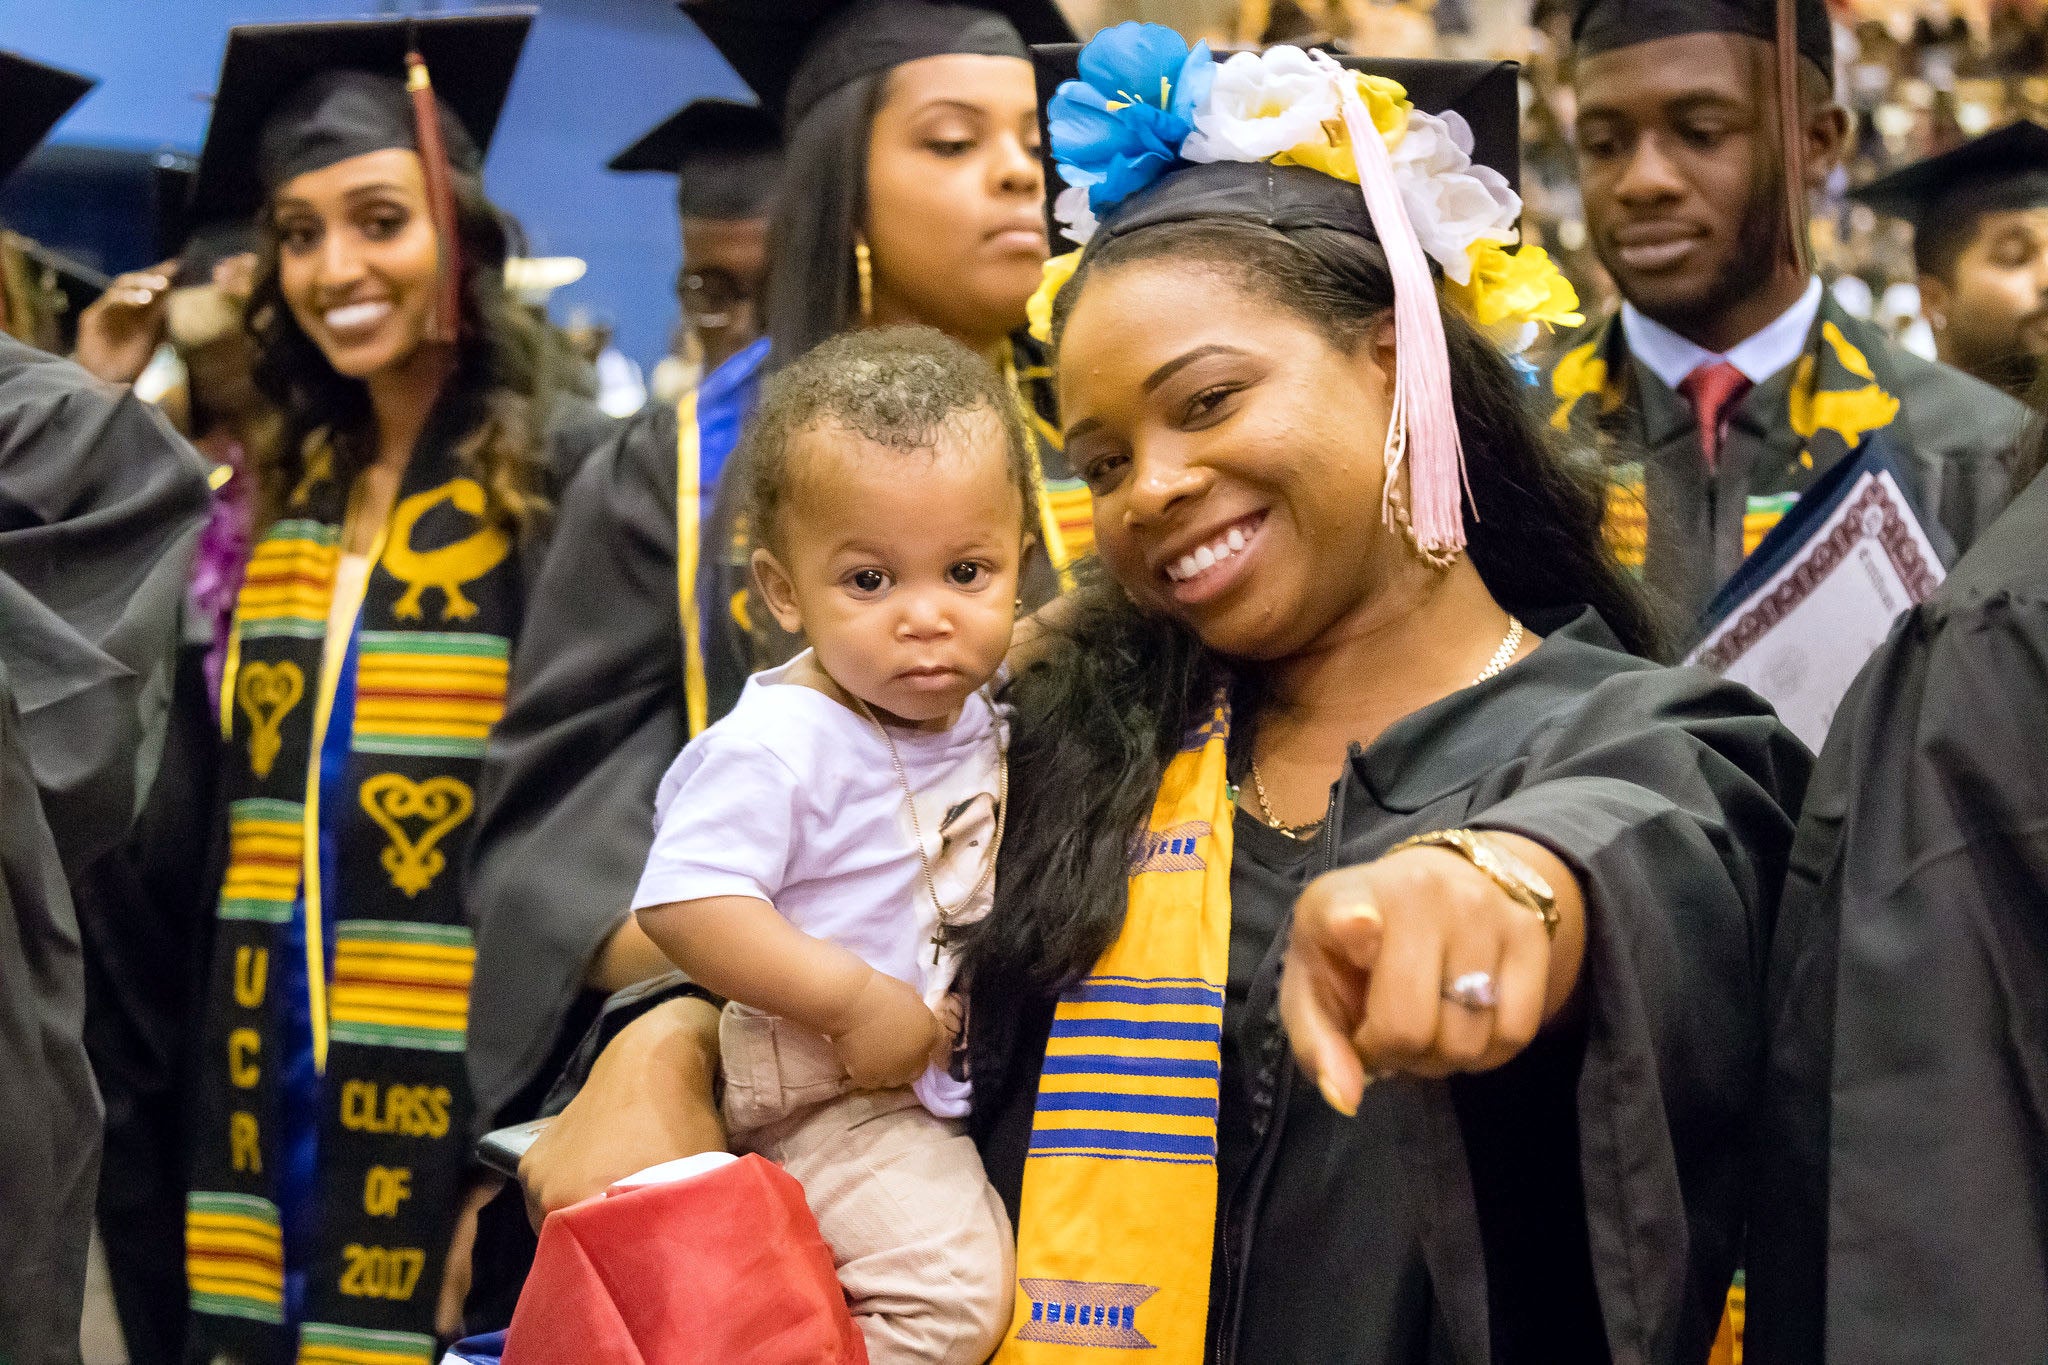 Student at graduation with a baby in her arms.